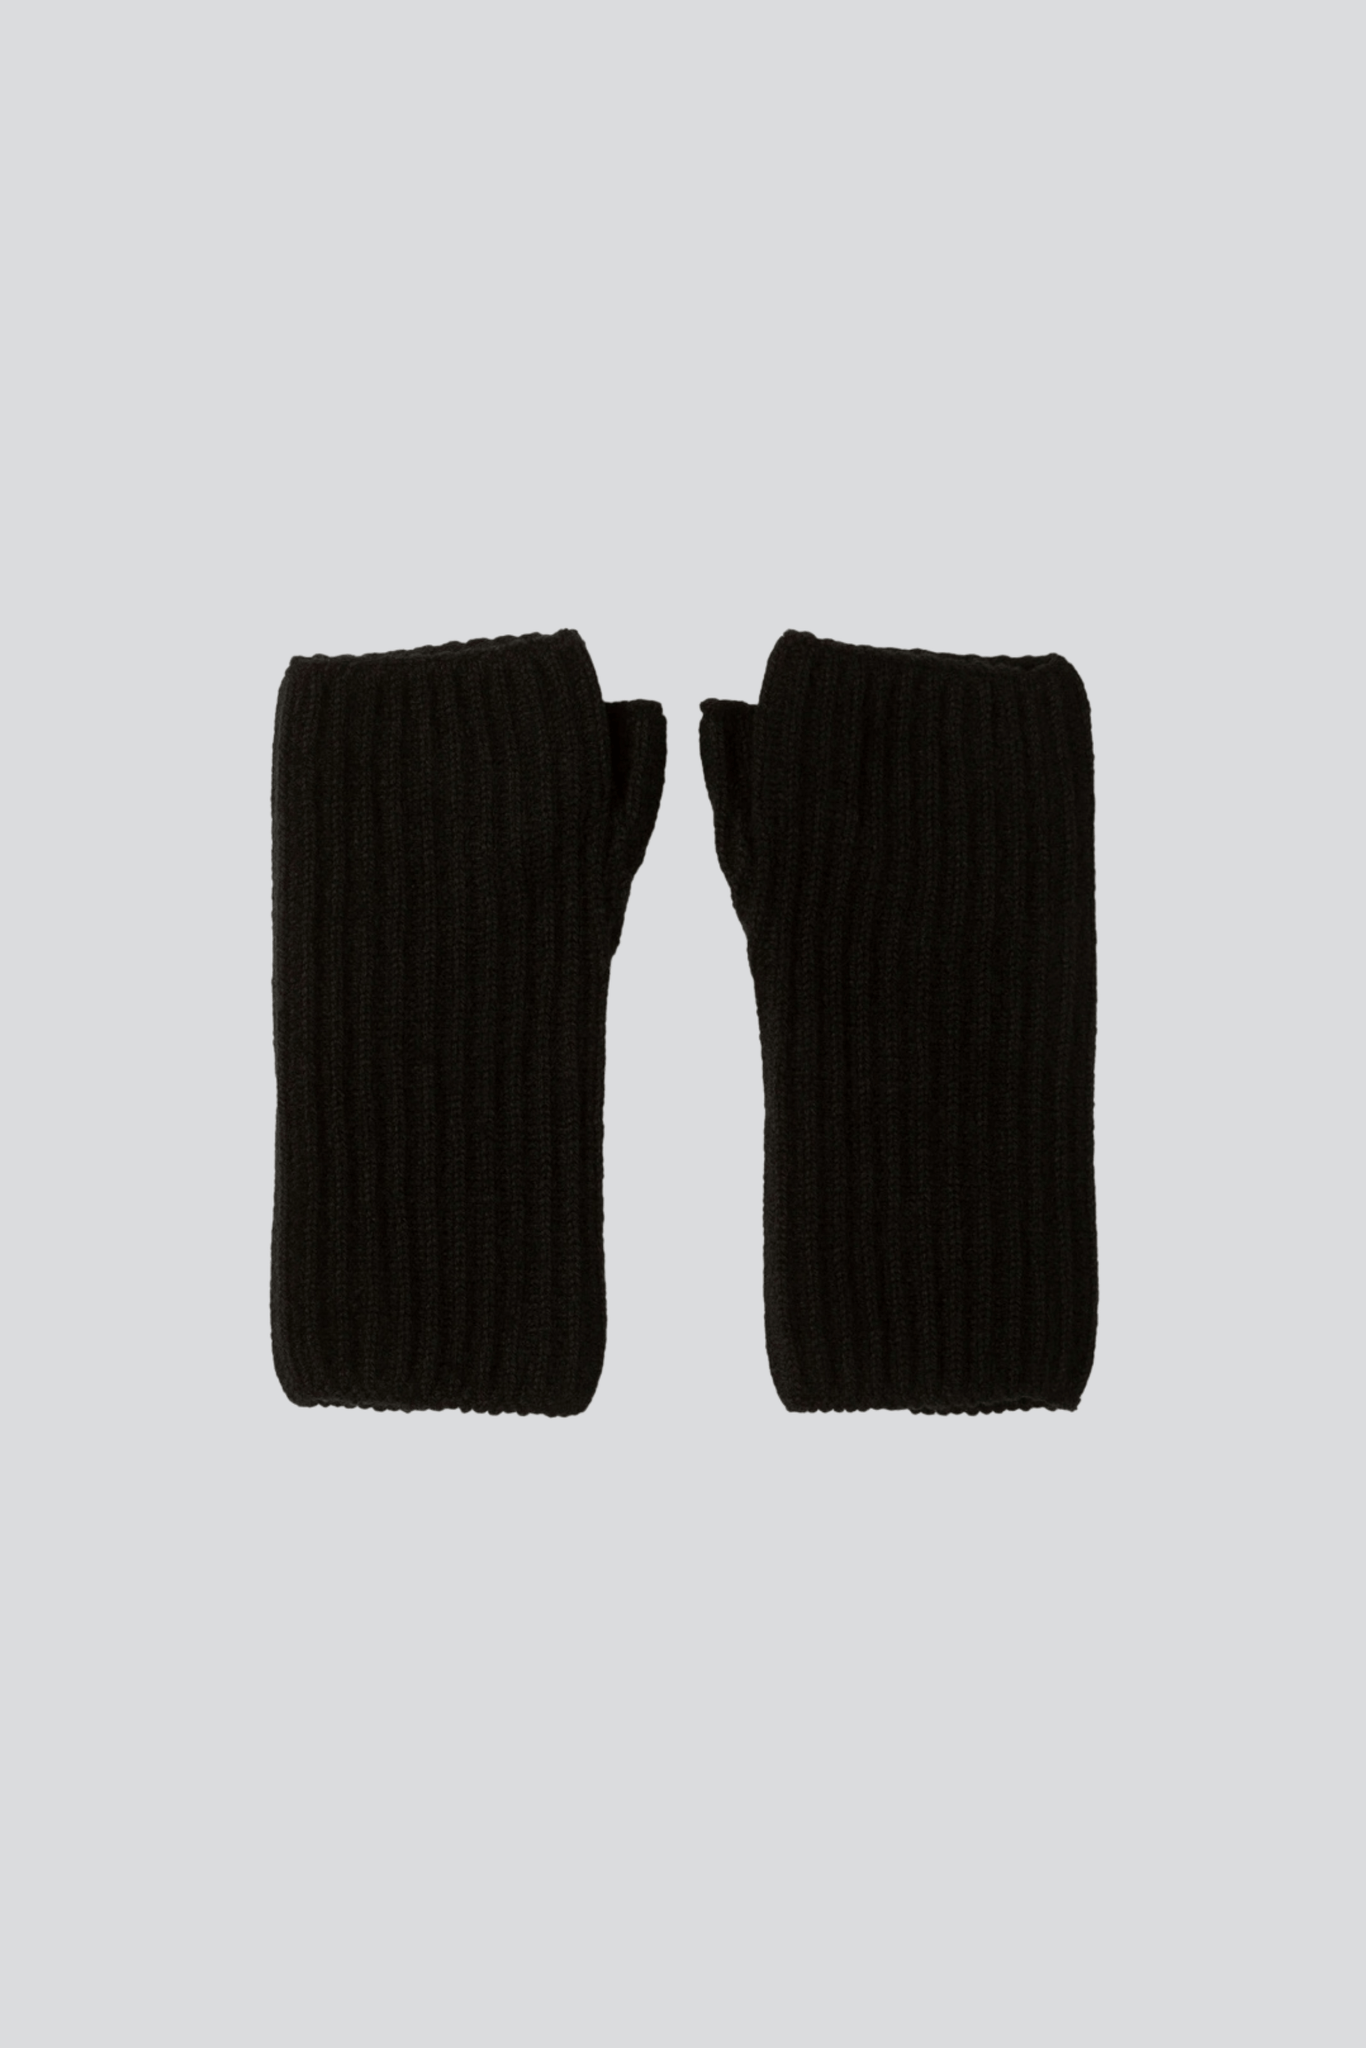 Luxury Ribbed Black Cashmere Wristwarmers by Lavender Hill Clothing